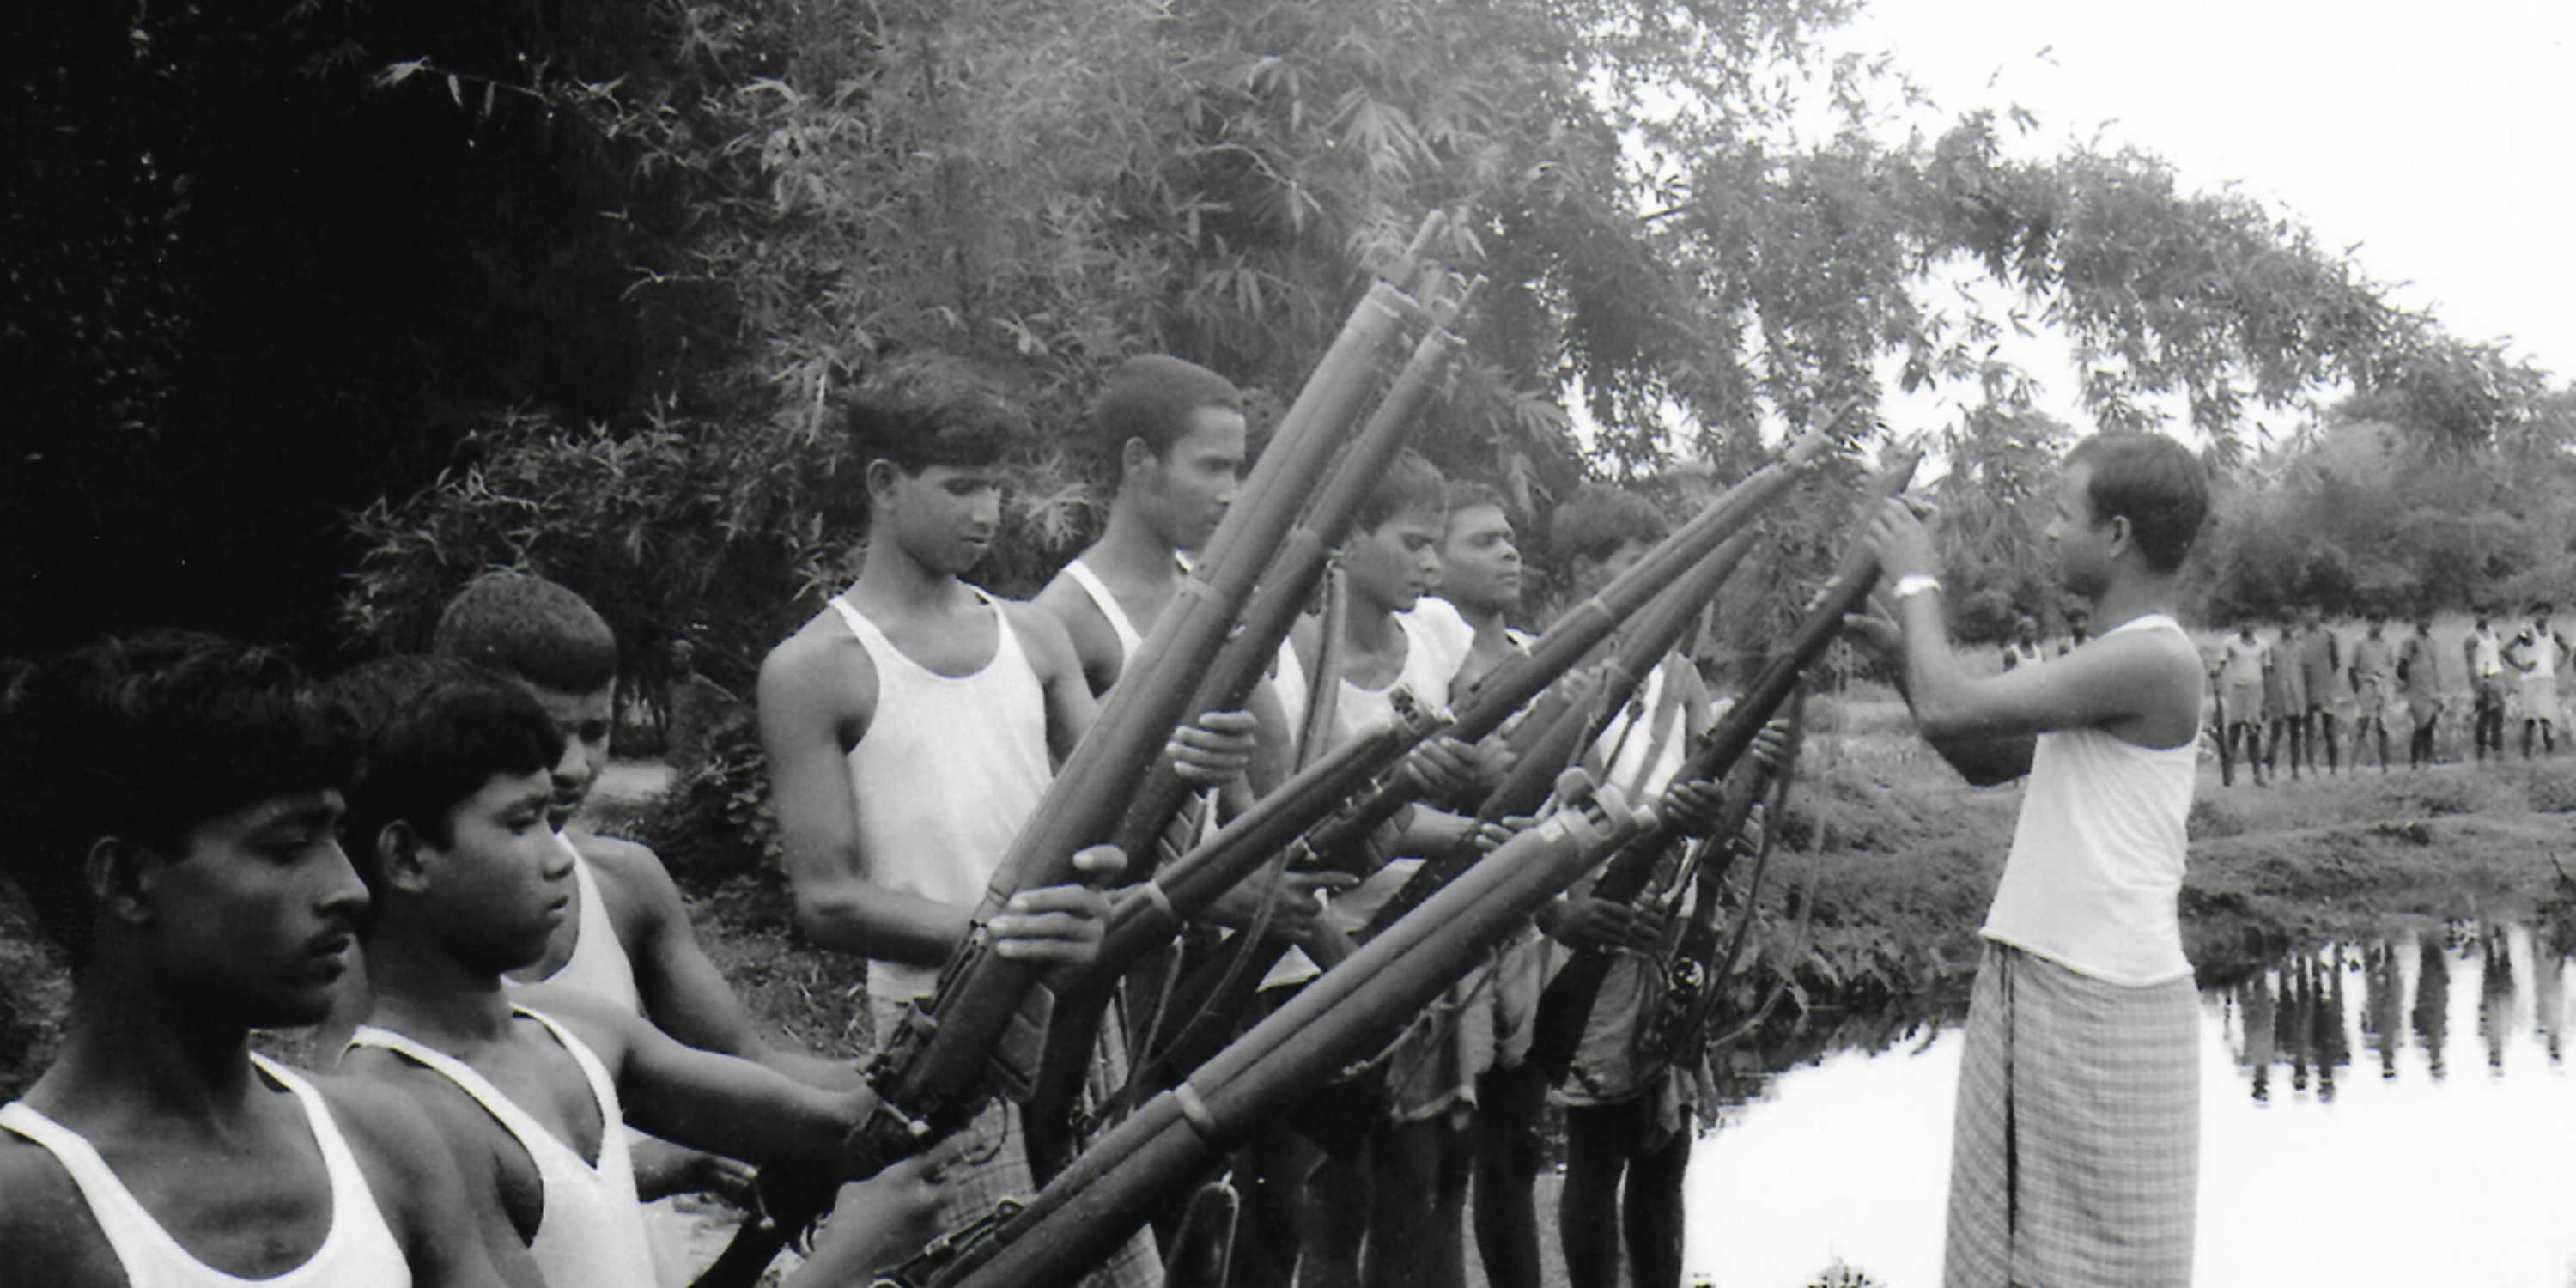 soldiers holding guns near a body of water